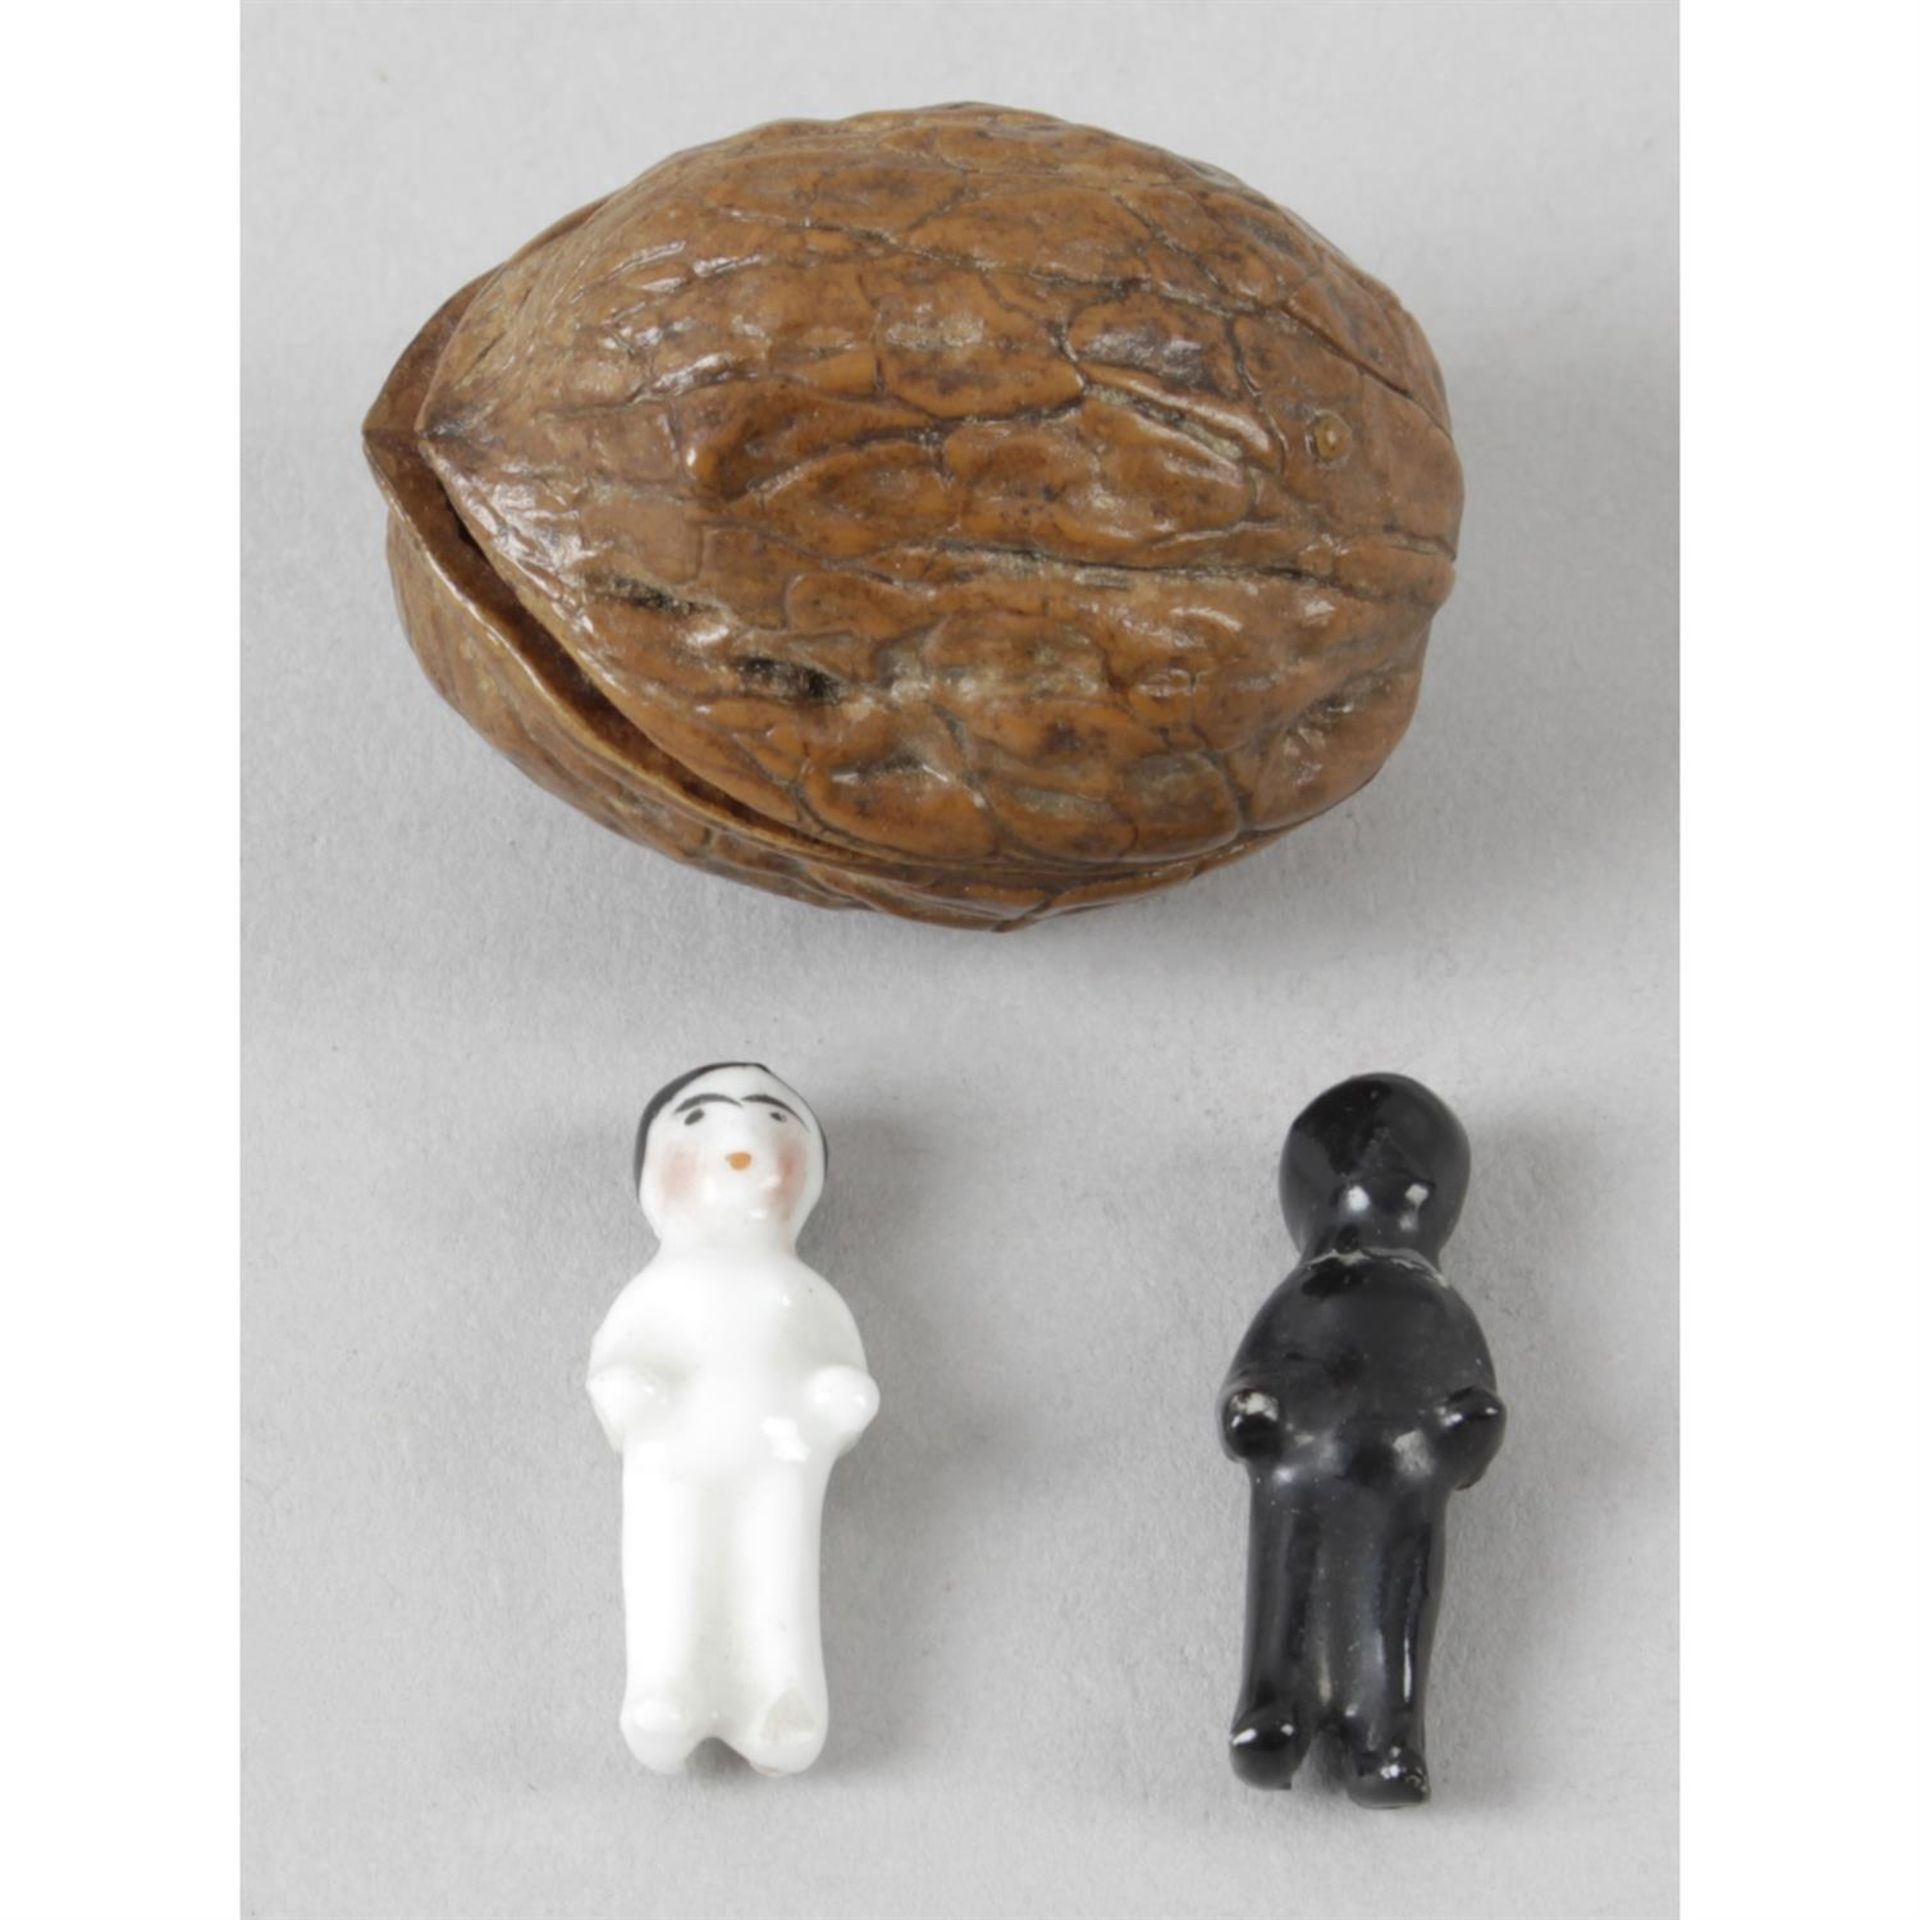 An antique walnut shell, containing two miniature ceramic dolls.